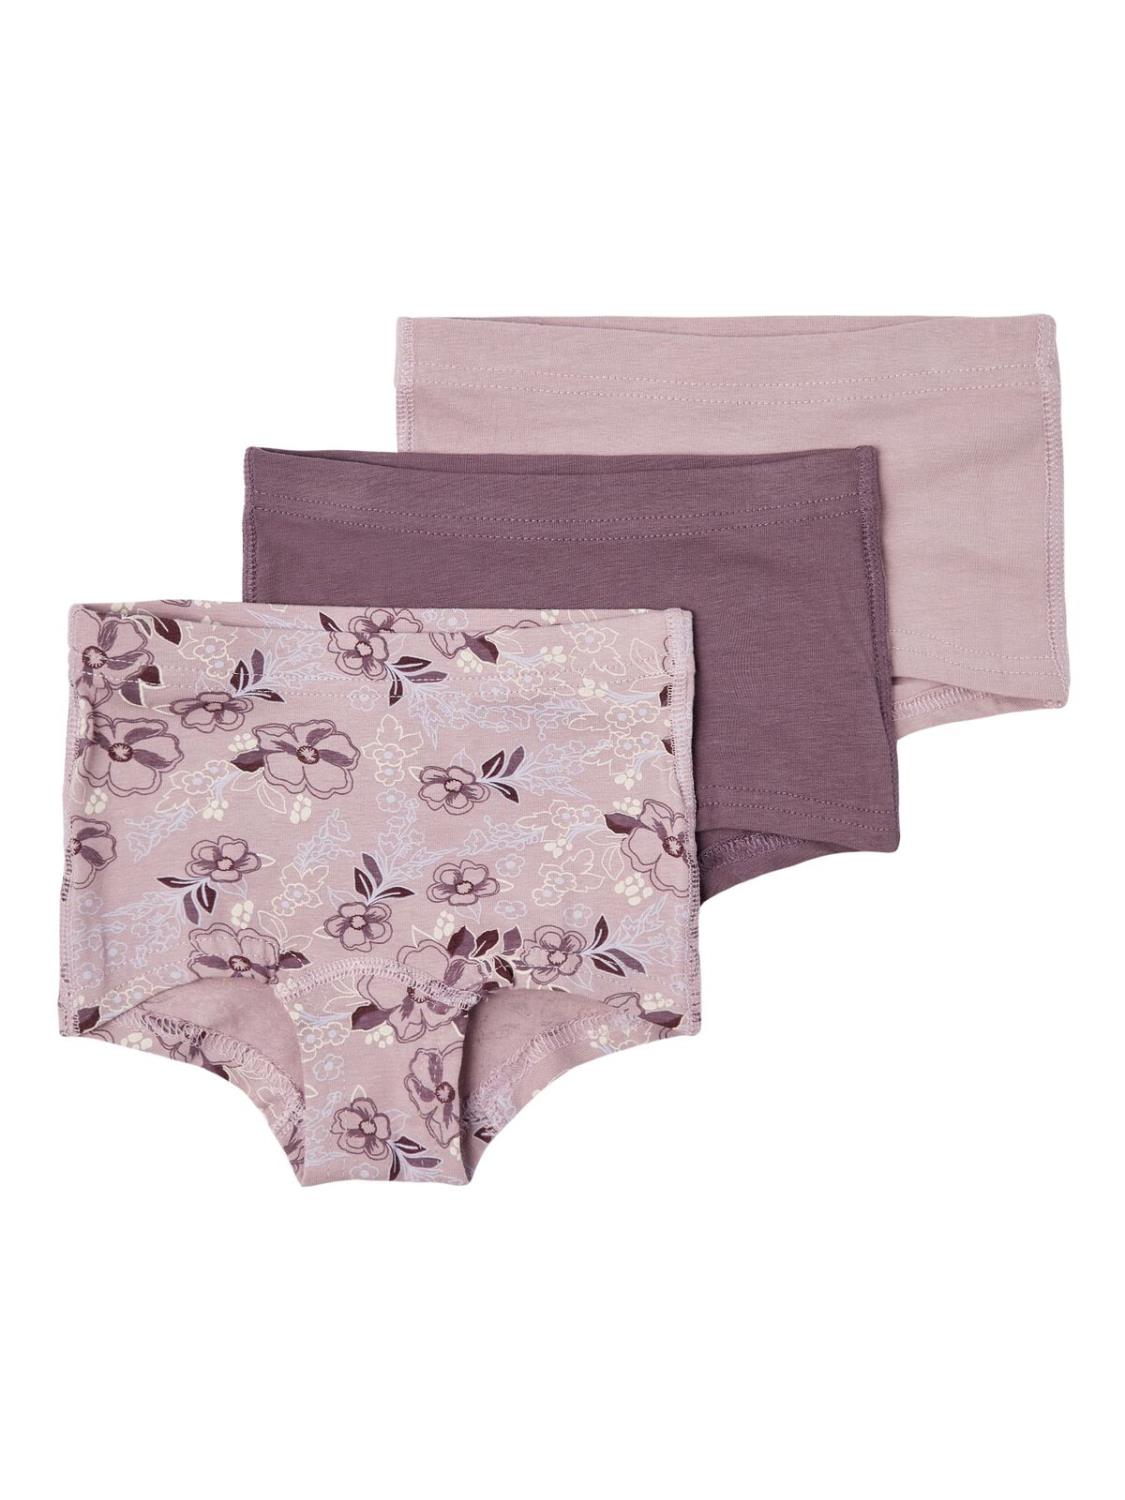 Tights 3pk - Artic Flowers